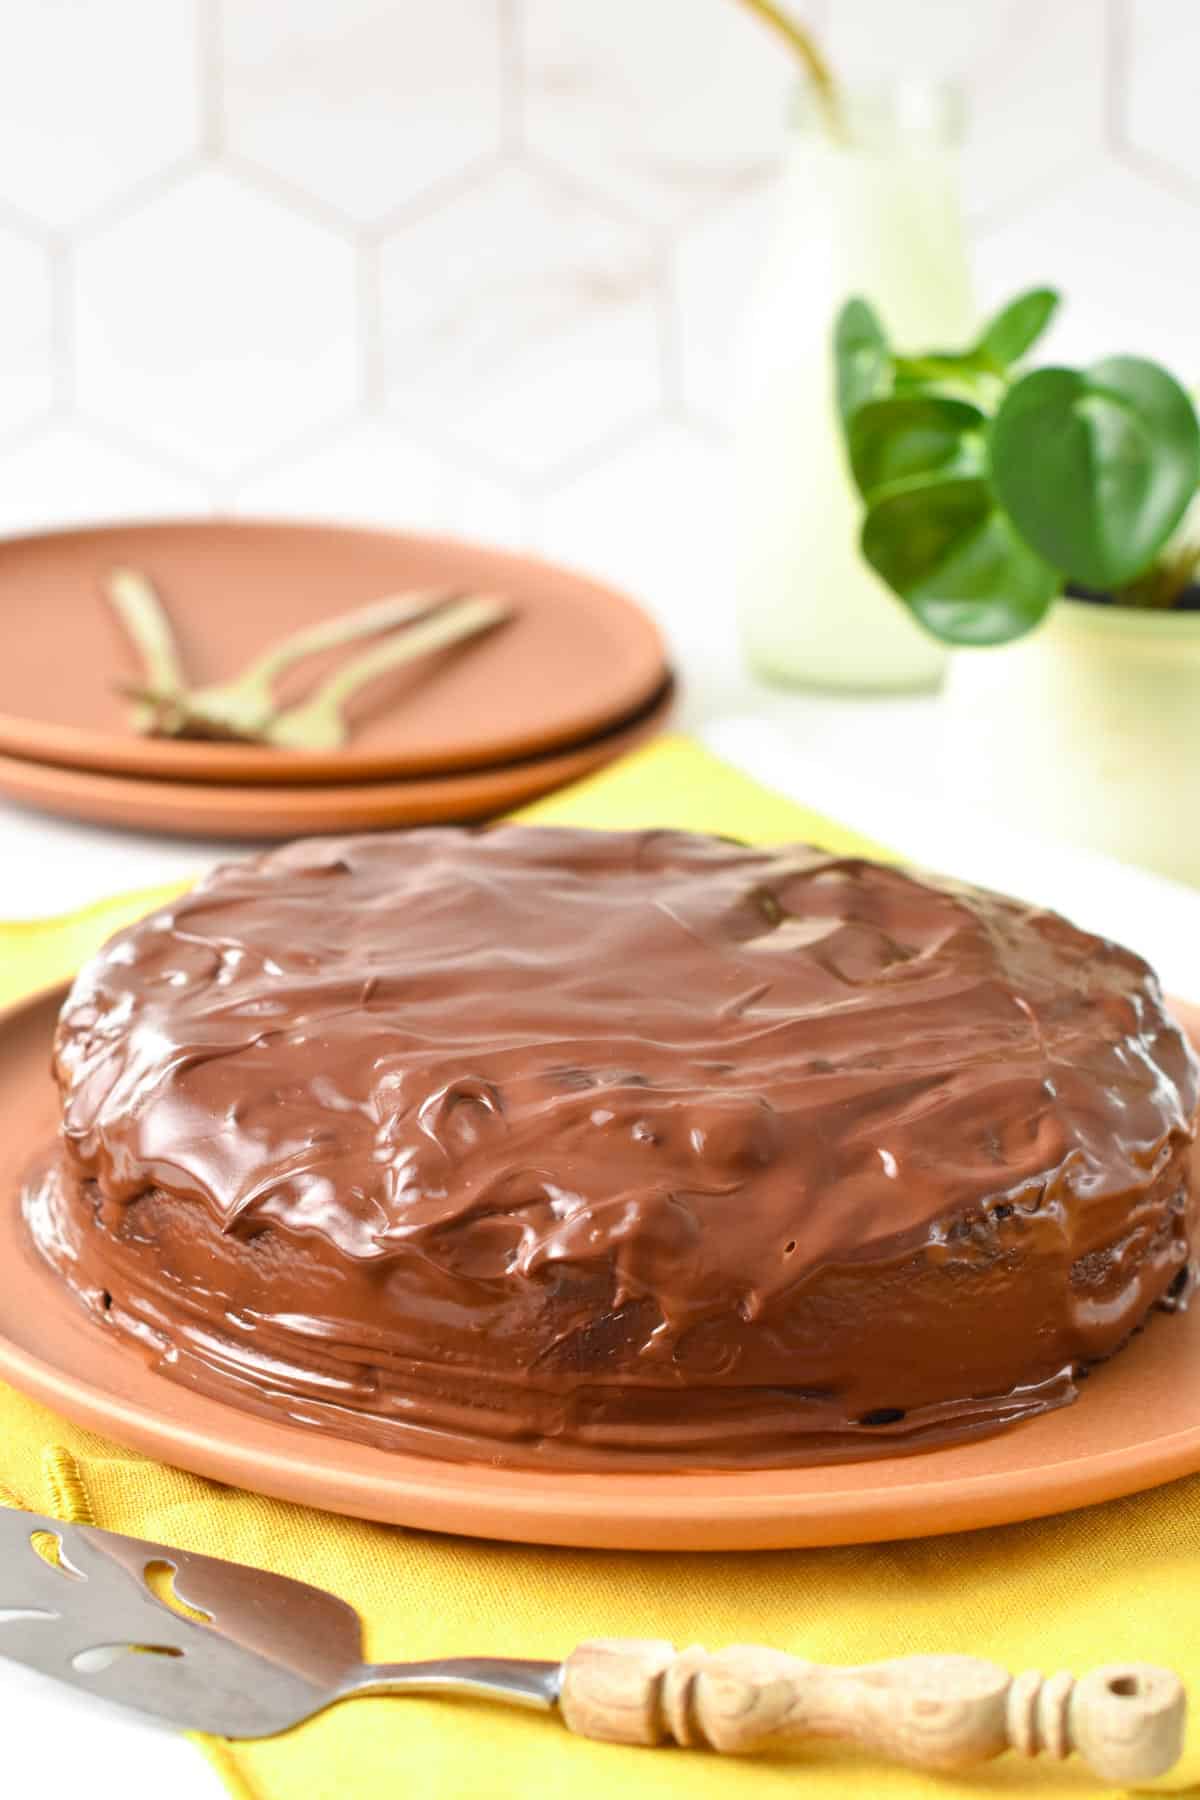 A vegan chocolate banana cake frosted with dairy-free ganache.